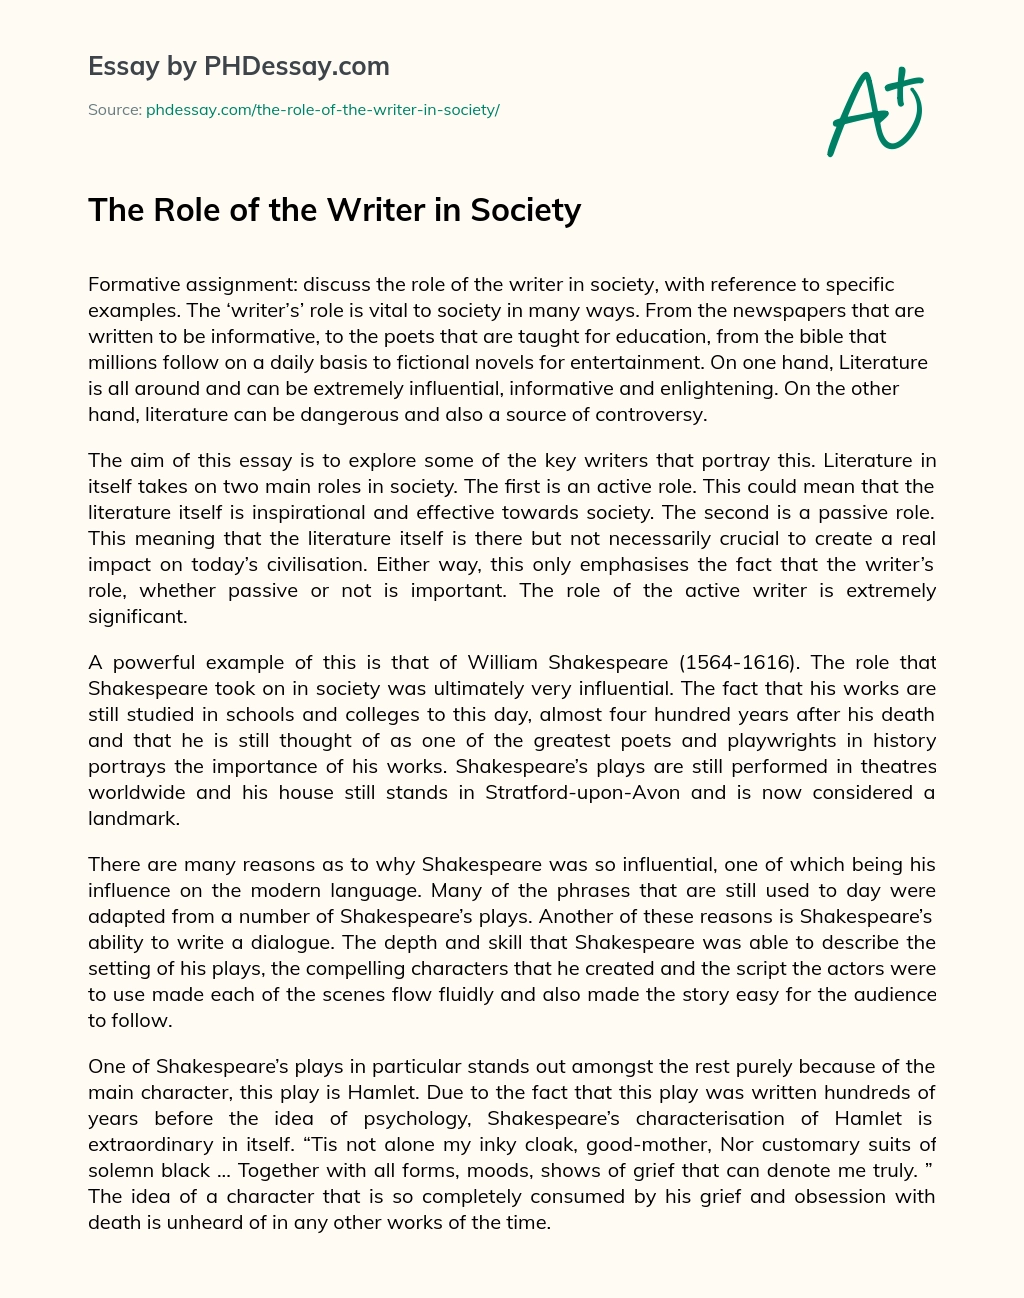 The Role of the Writer in Society essay